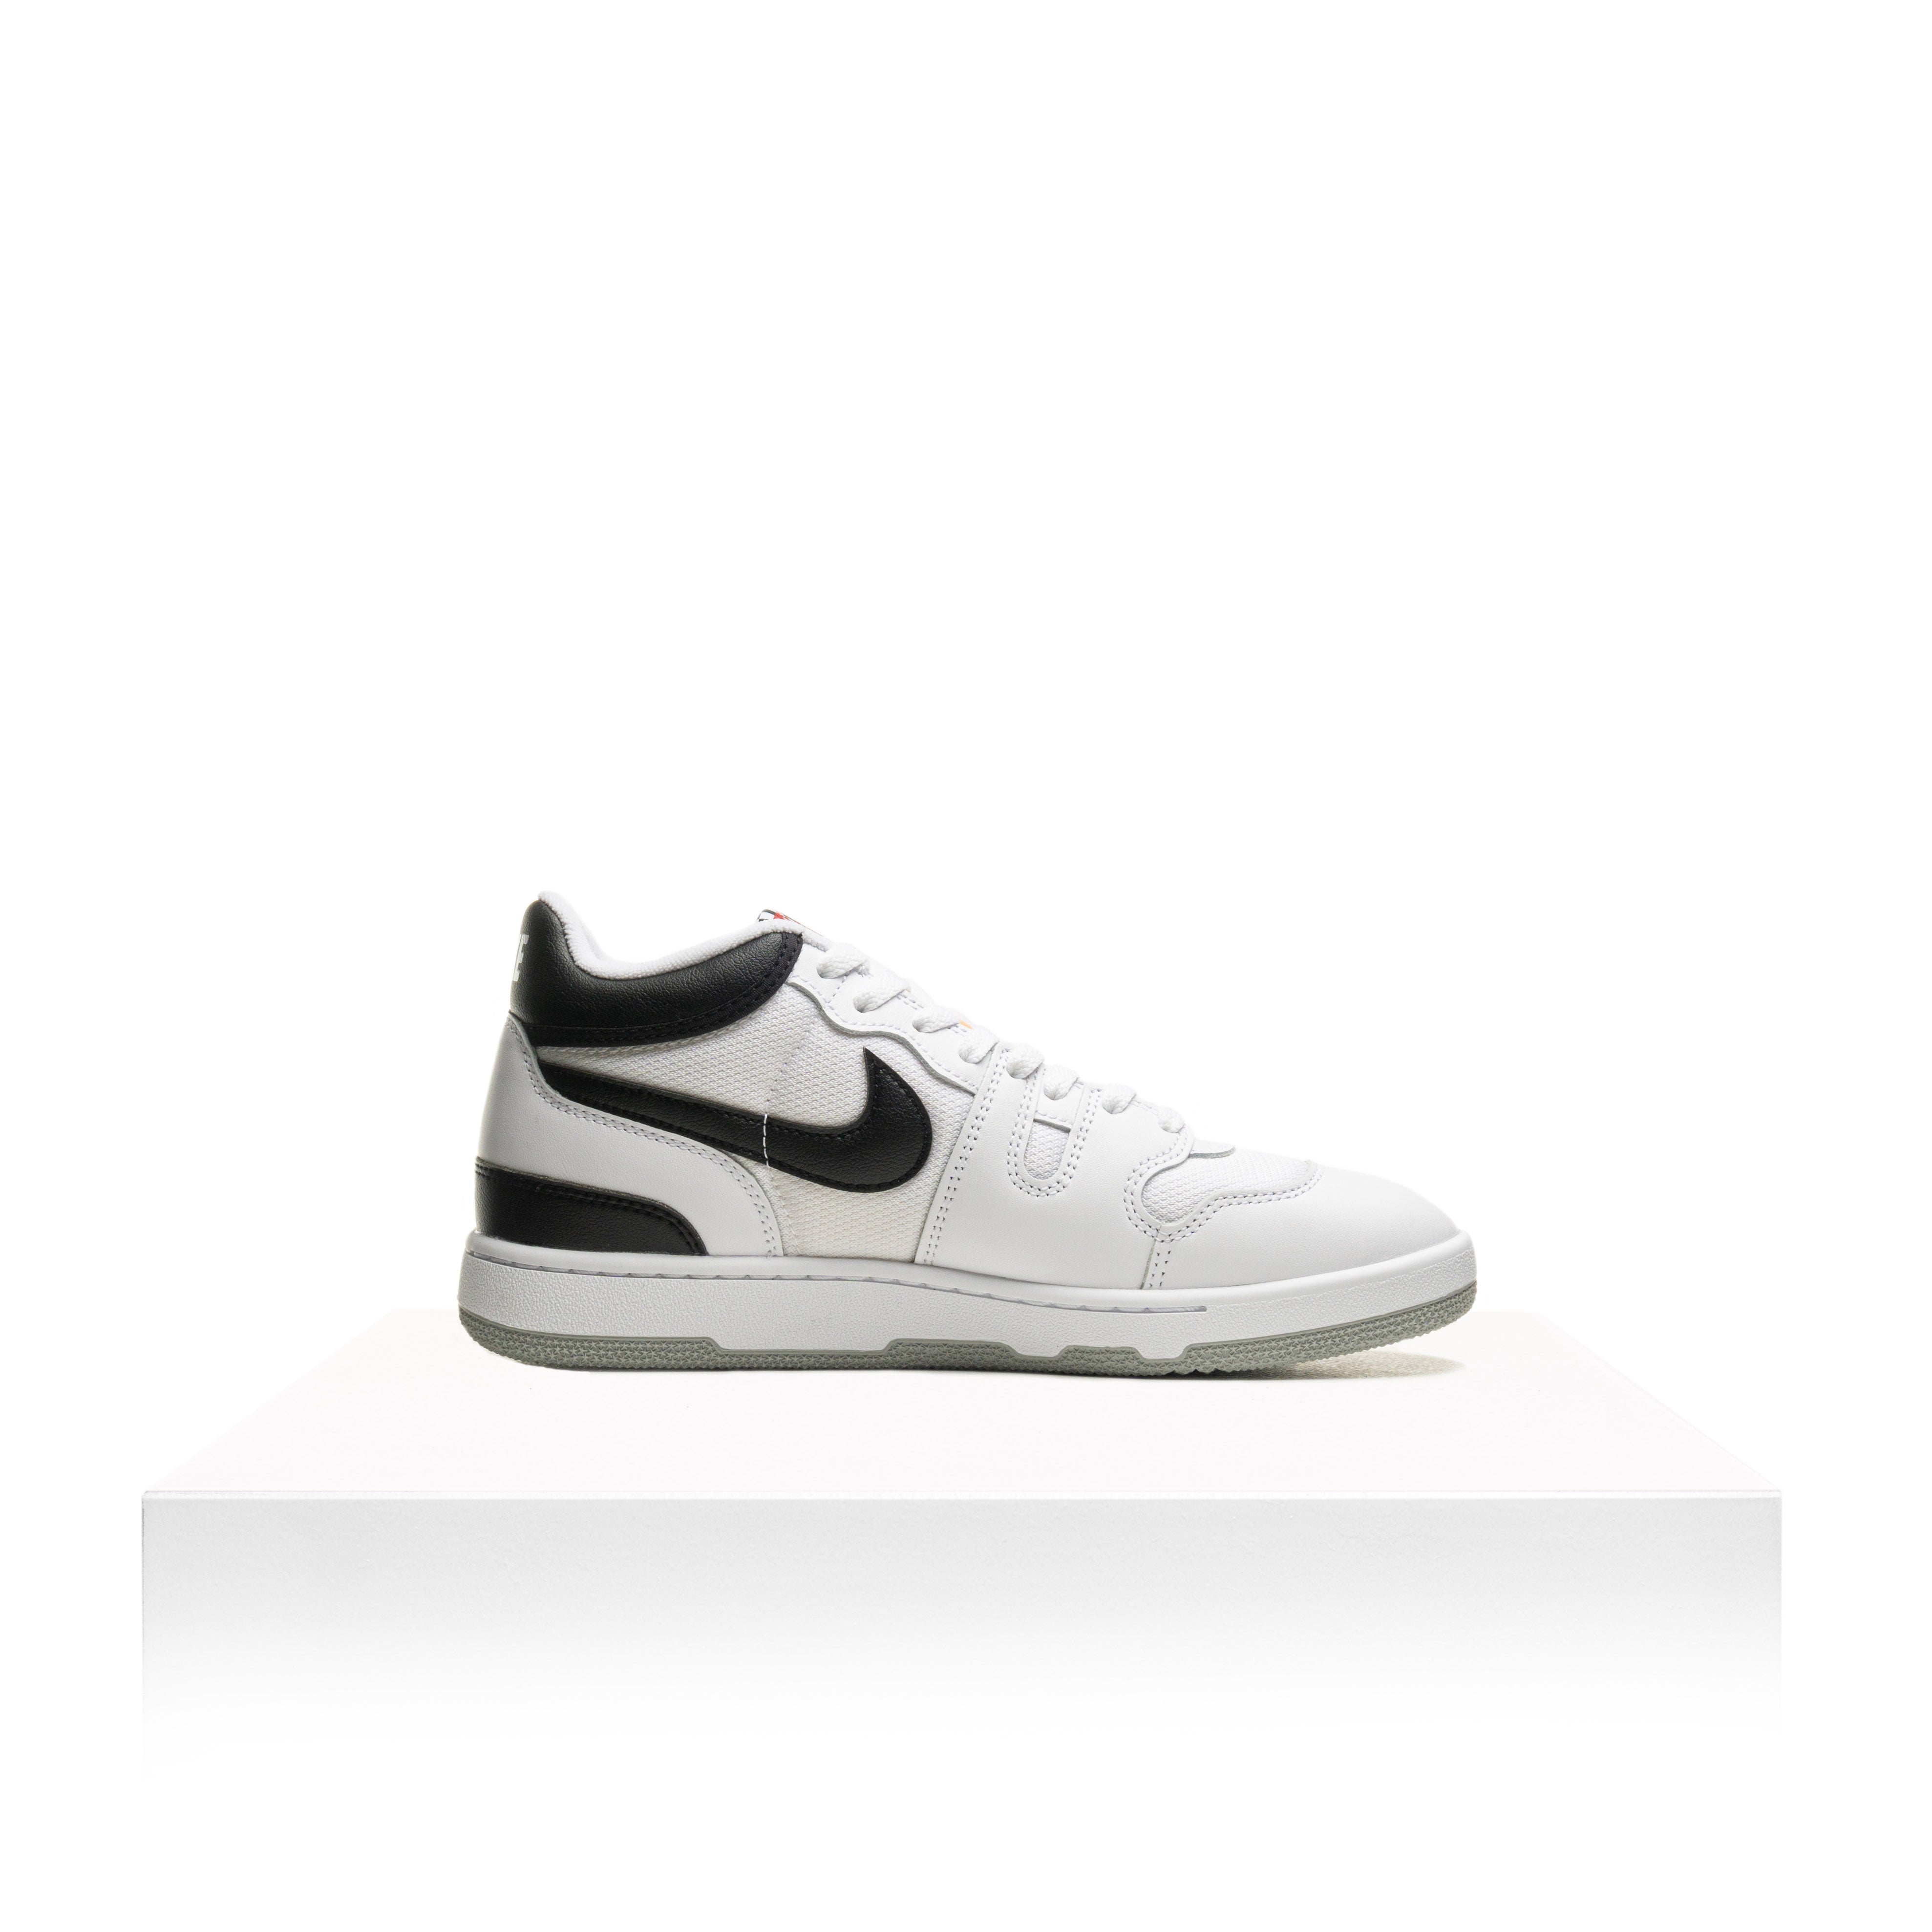 Nike Attack QS SP image